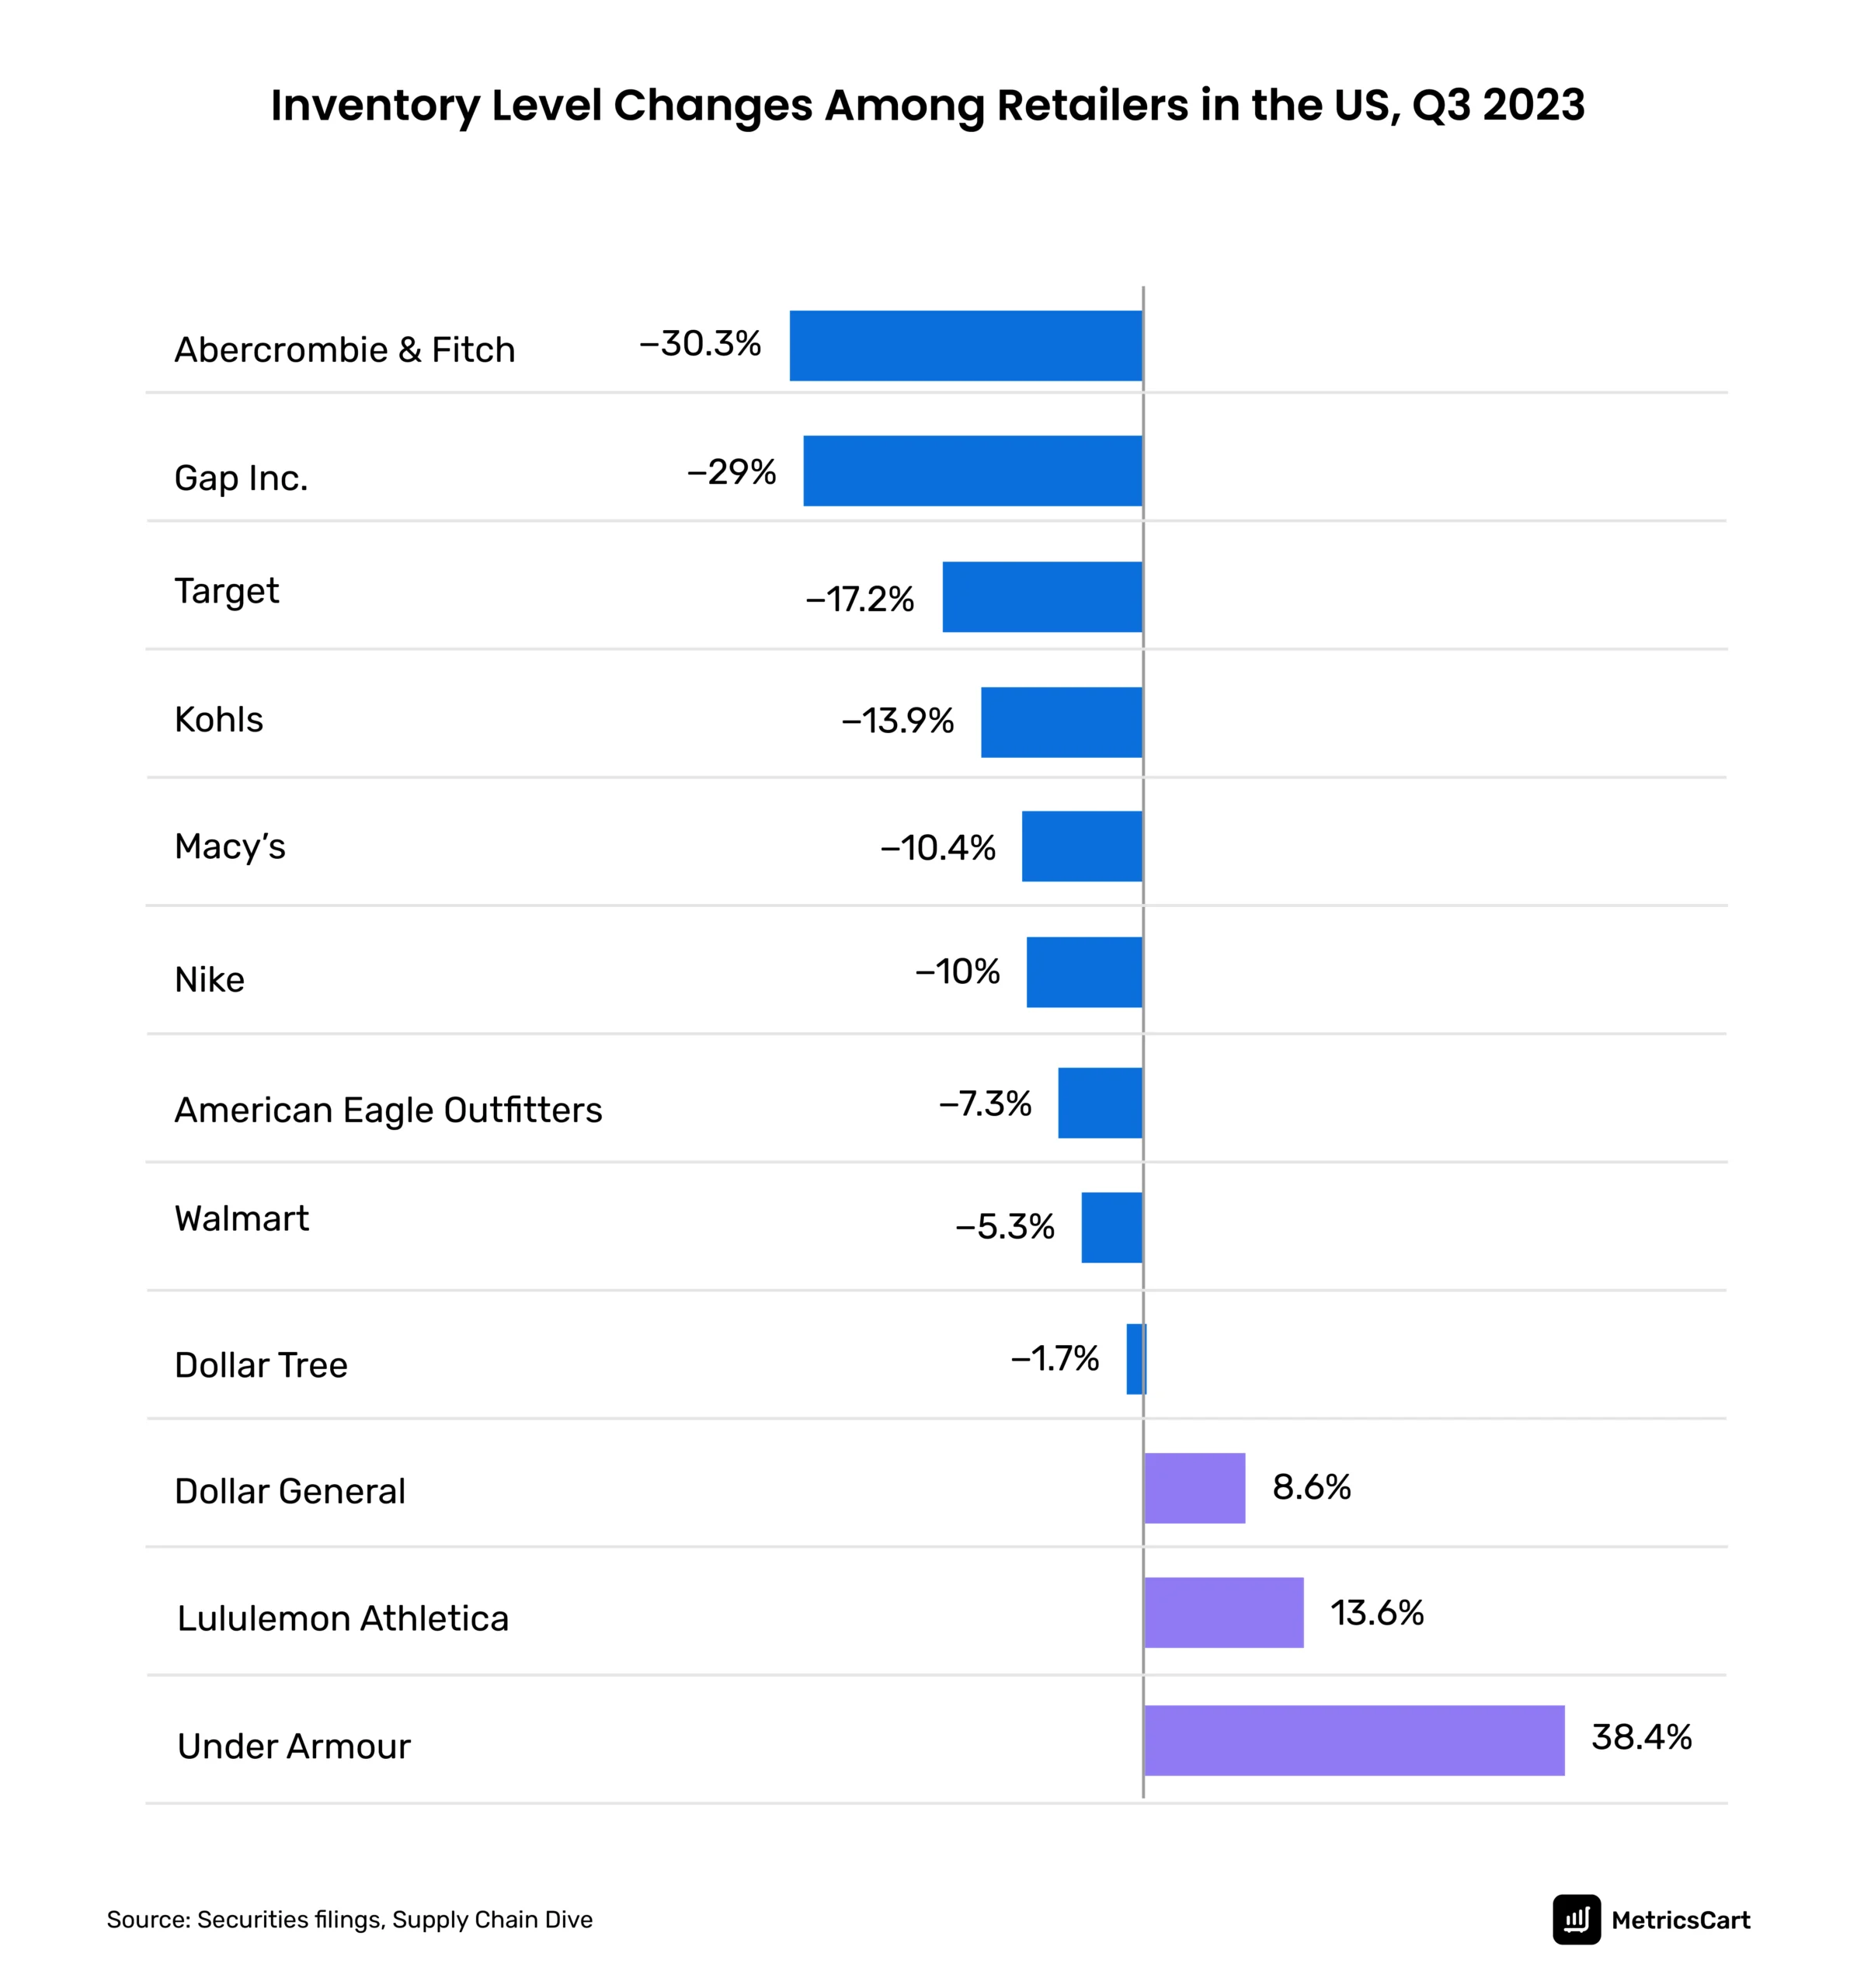 Chart showing Changes in inventory level among retailers in the US